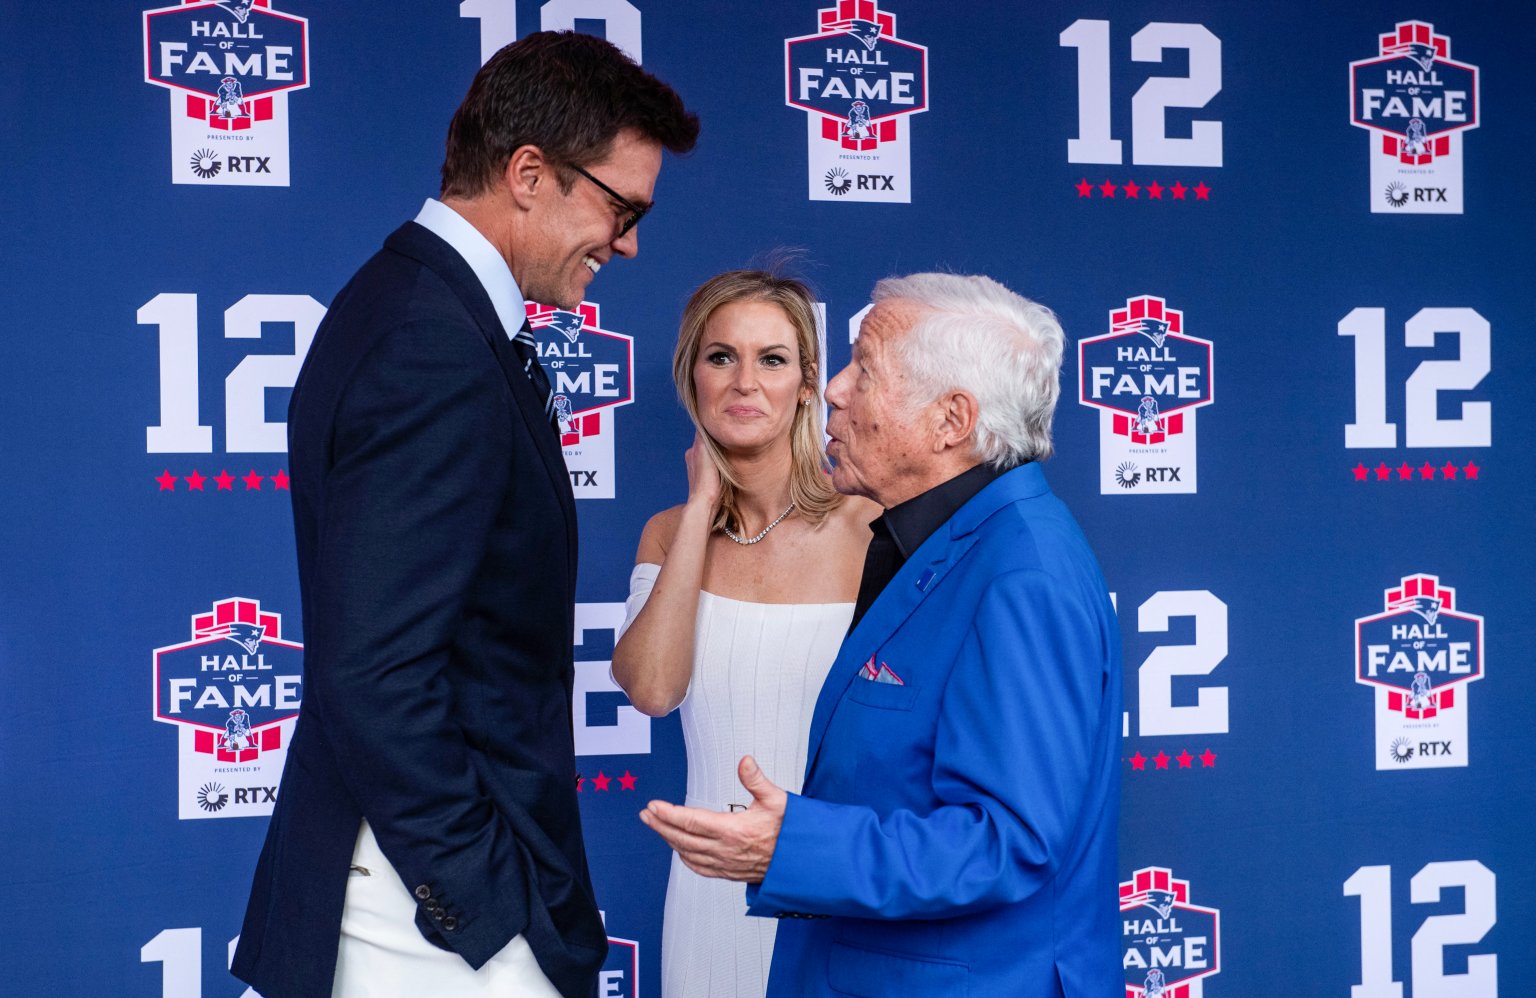 Scenes from Tom Brady’s Patriots Hall of Fame induction NECN